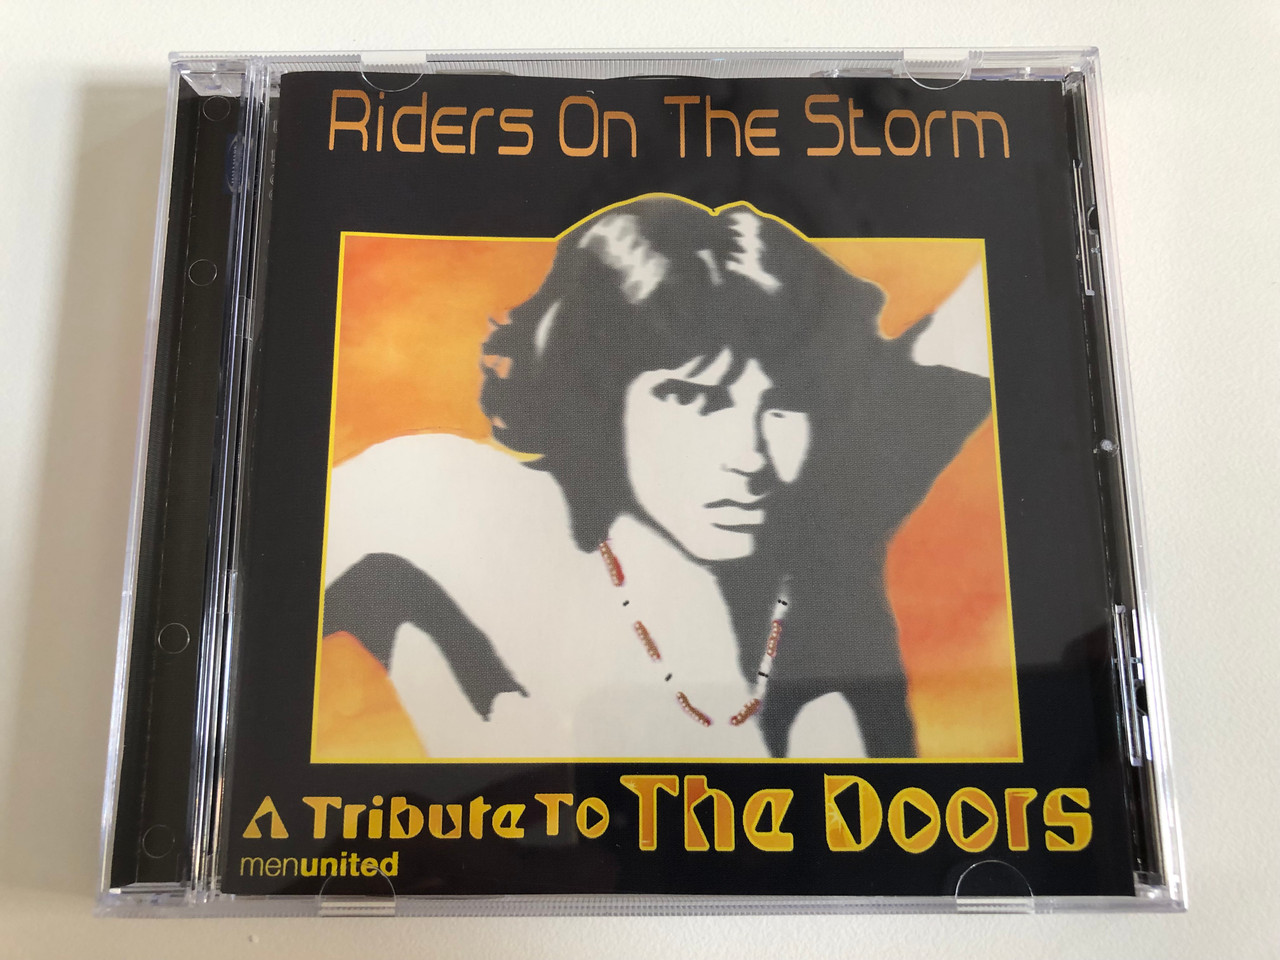 https://cdn10.bigcommerce.com/s-62bdpkt7pb/products/31255/images/183985/Riders_On_The_Storm_-_A_Tribute_to_The_Doors_Hallmark_Audio_CD_2002_HALMCD_1091_1__51356.1625833661.1280.1280.JPG?c=2